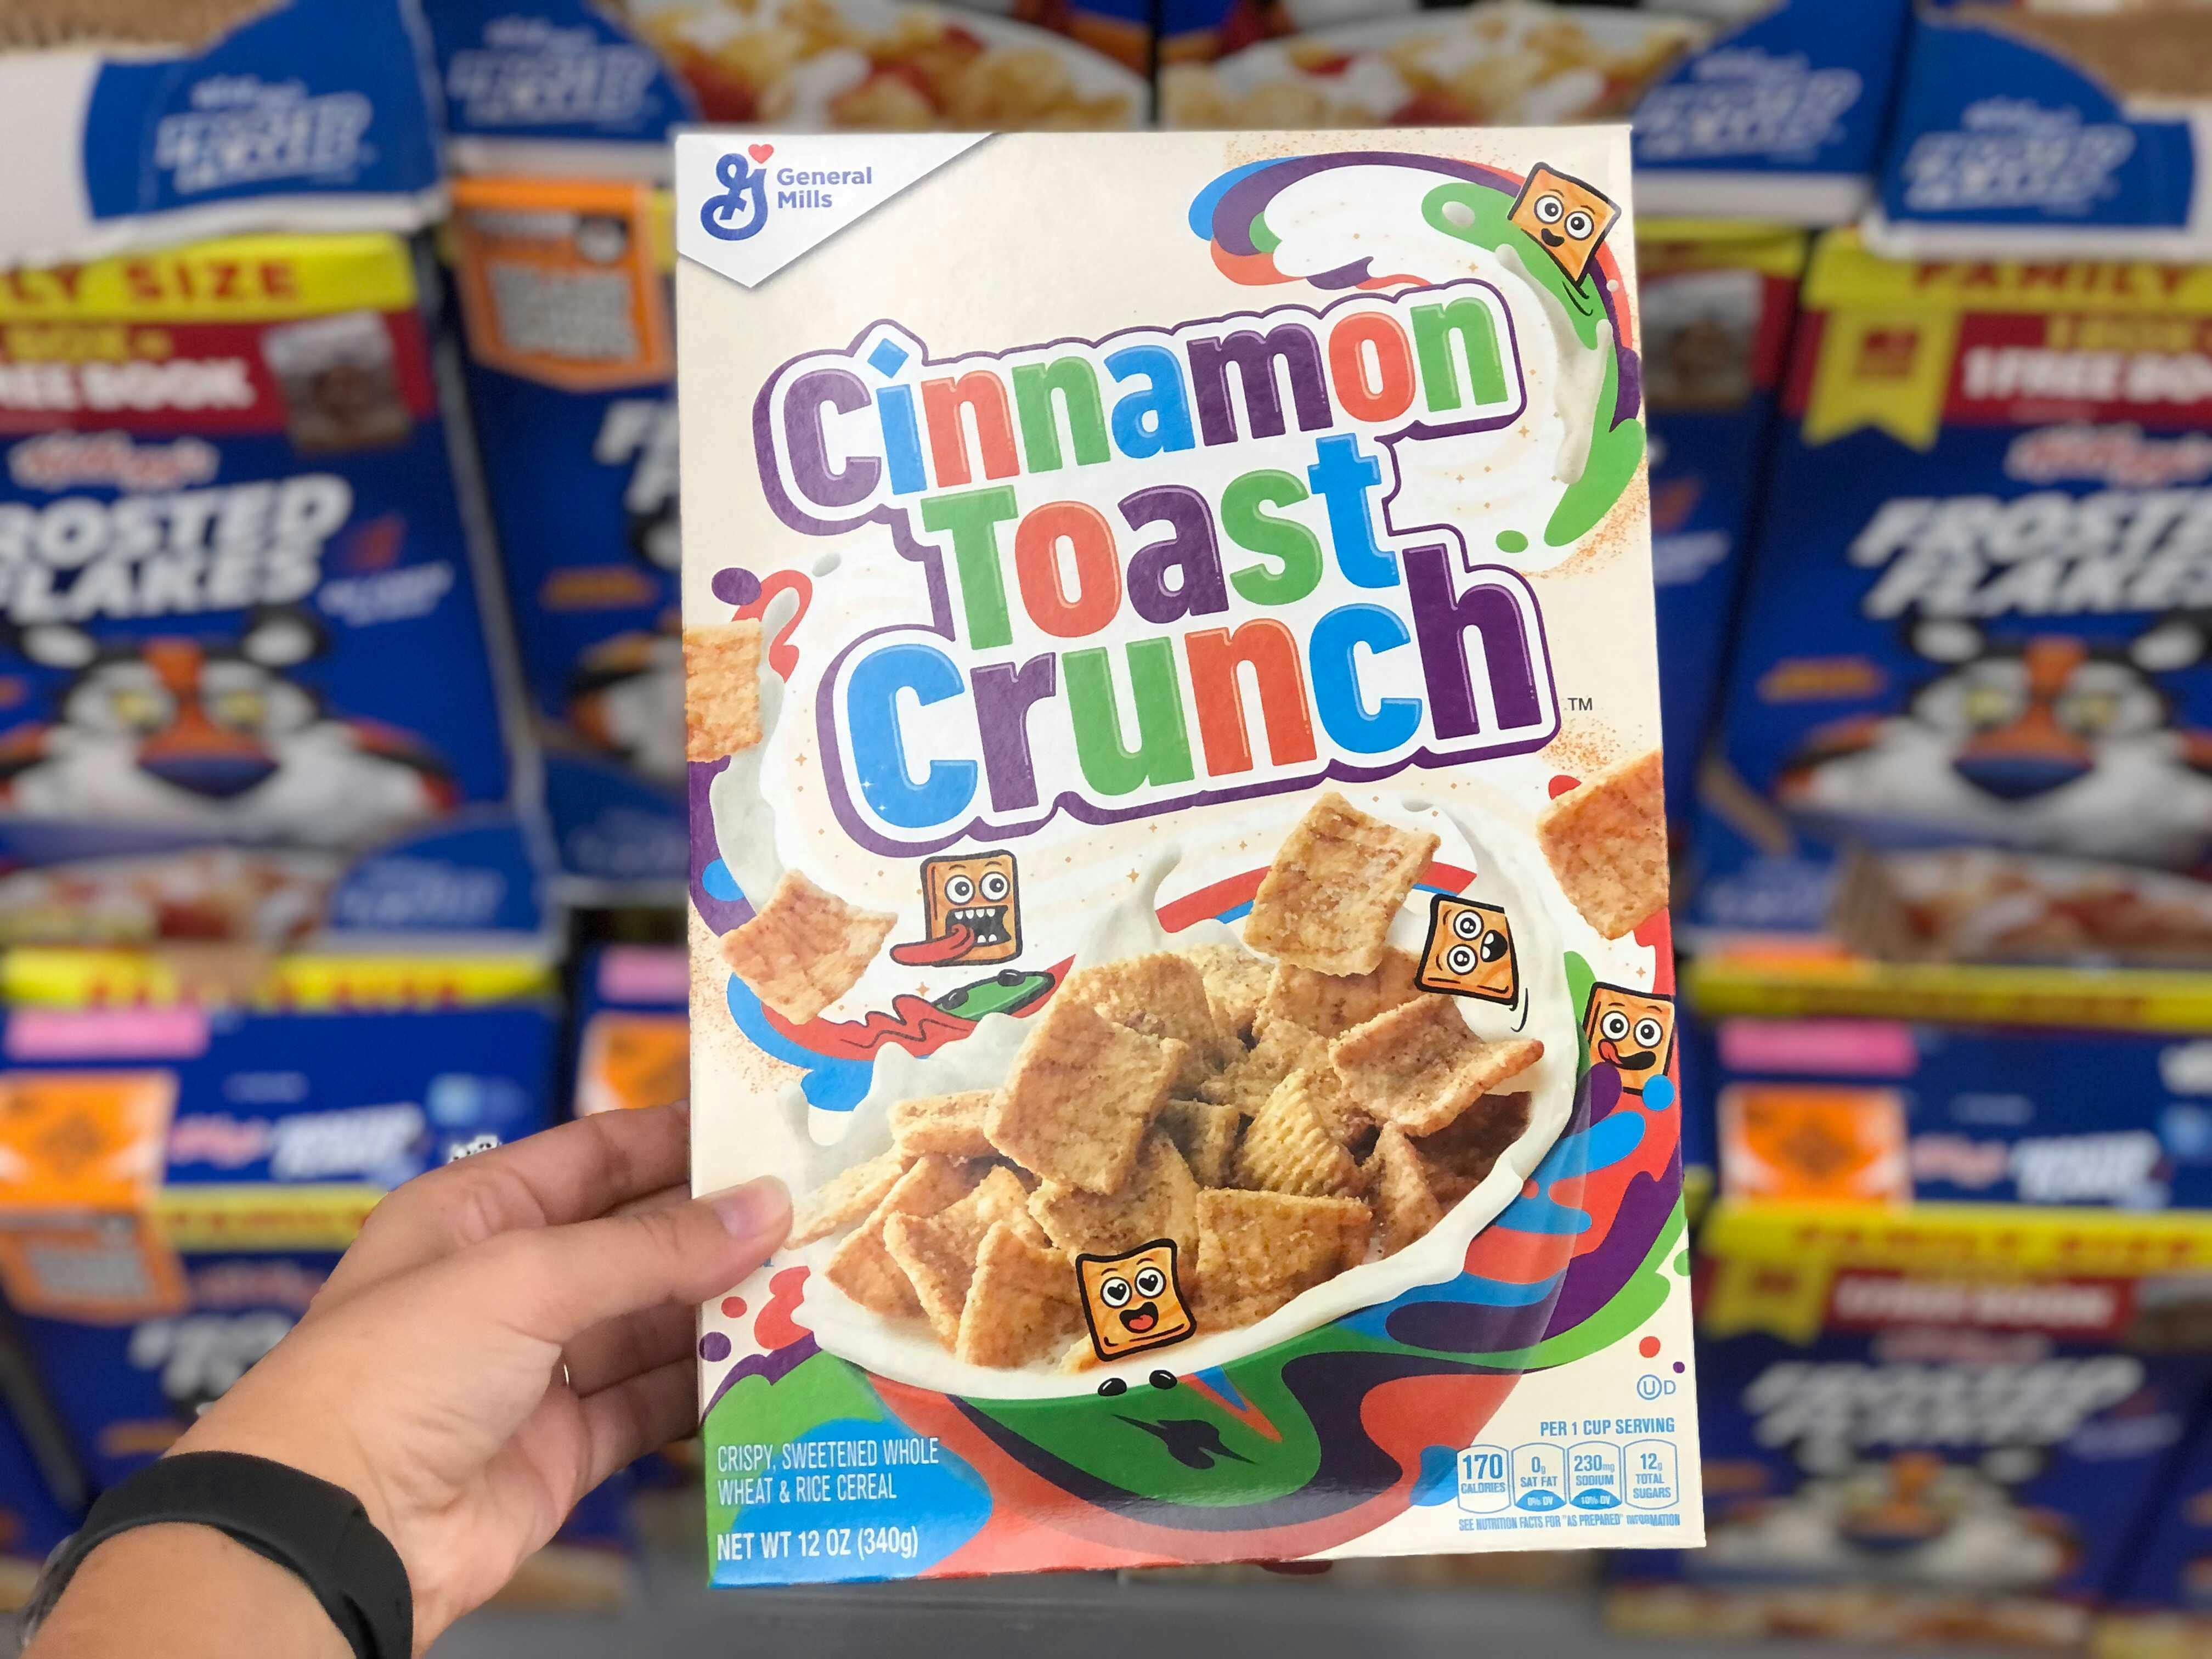 Someone holding up a box of Cinnamon Toast Crunch cereal